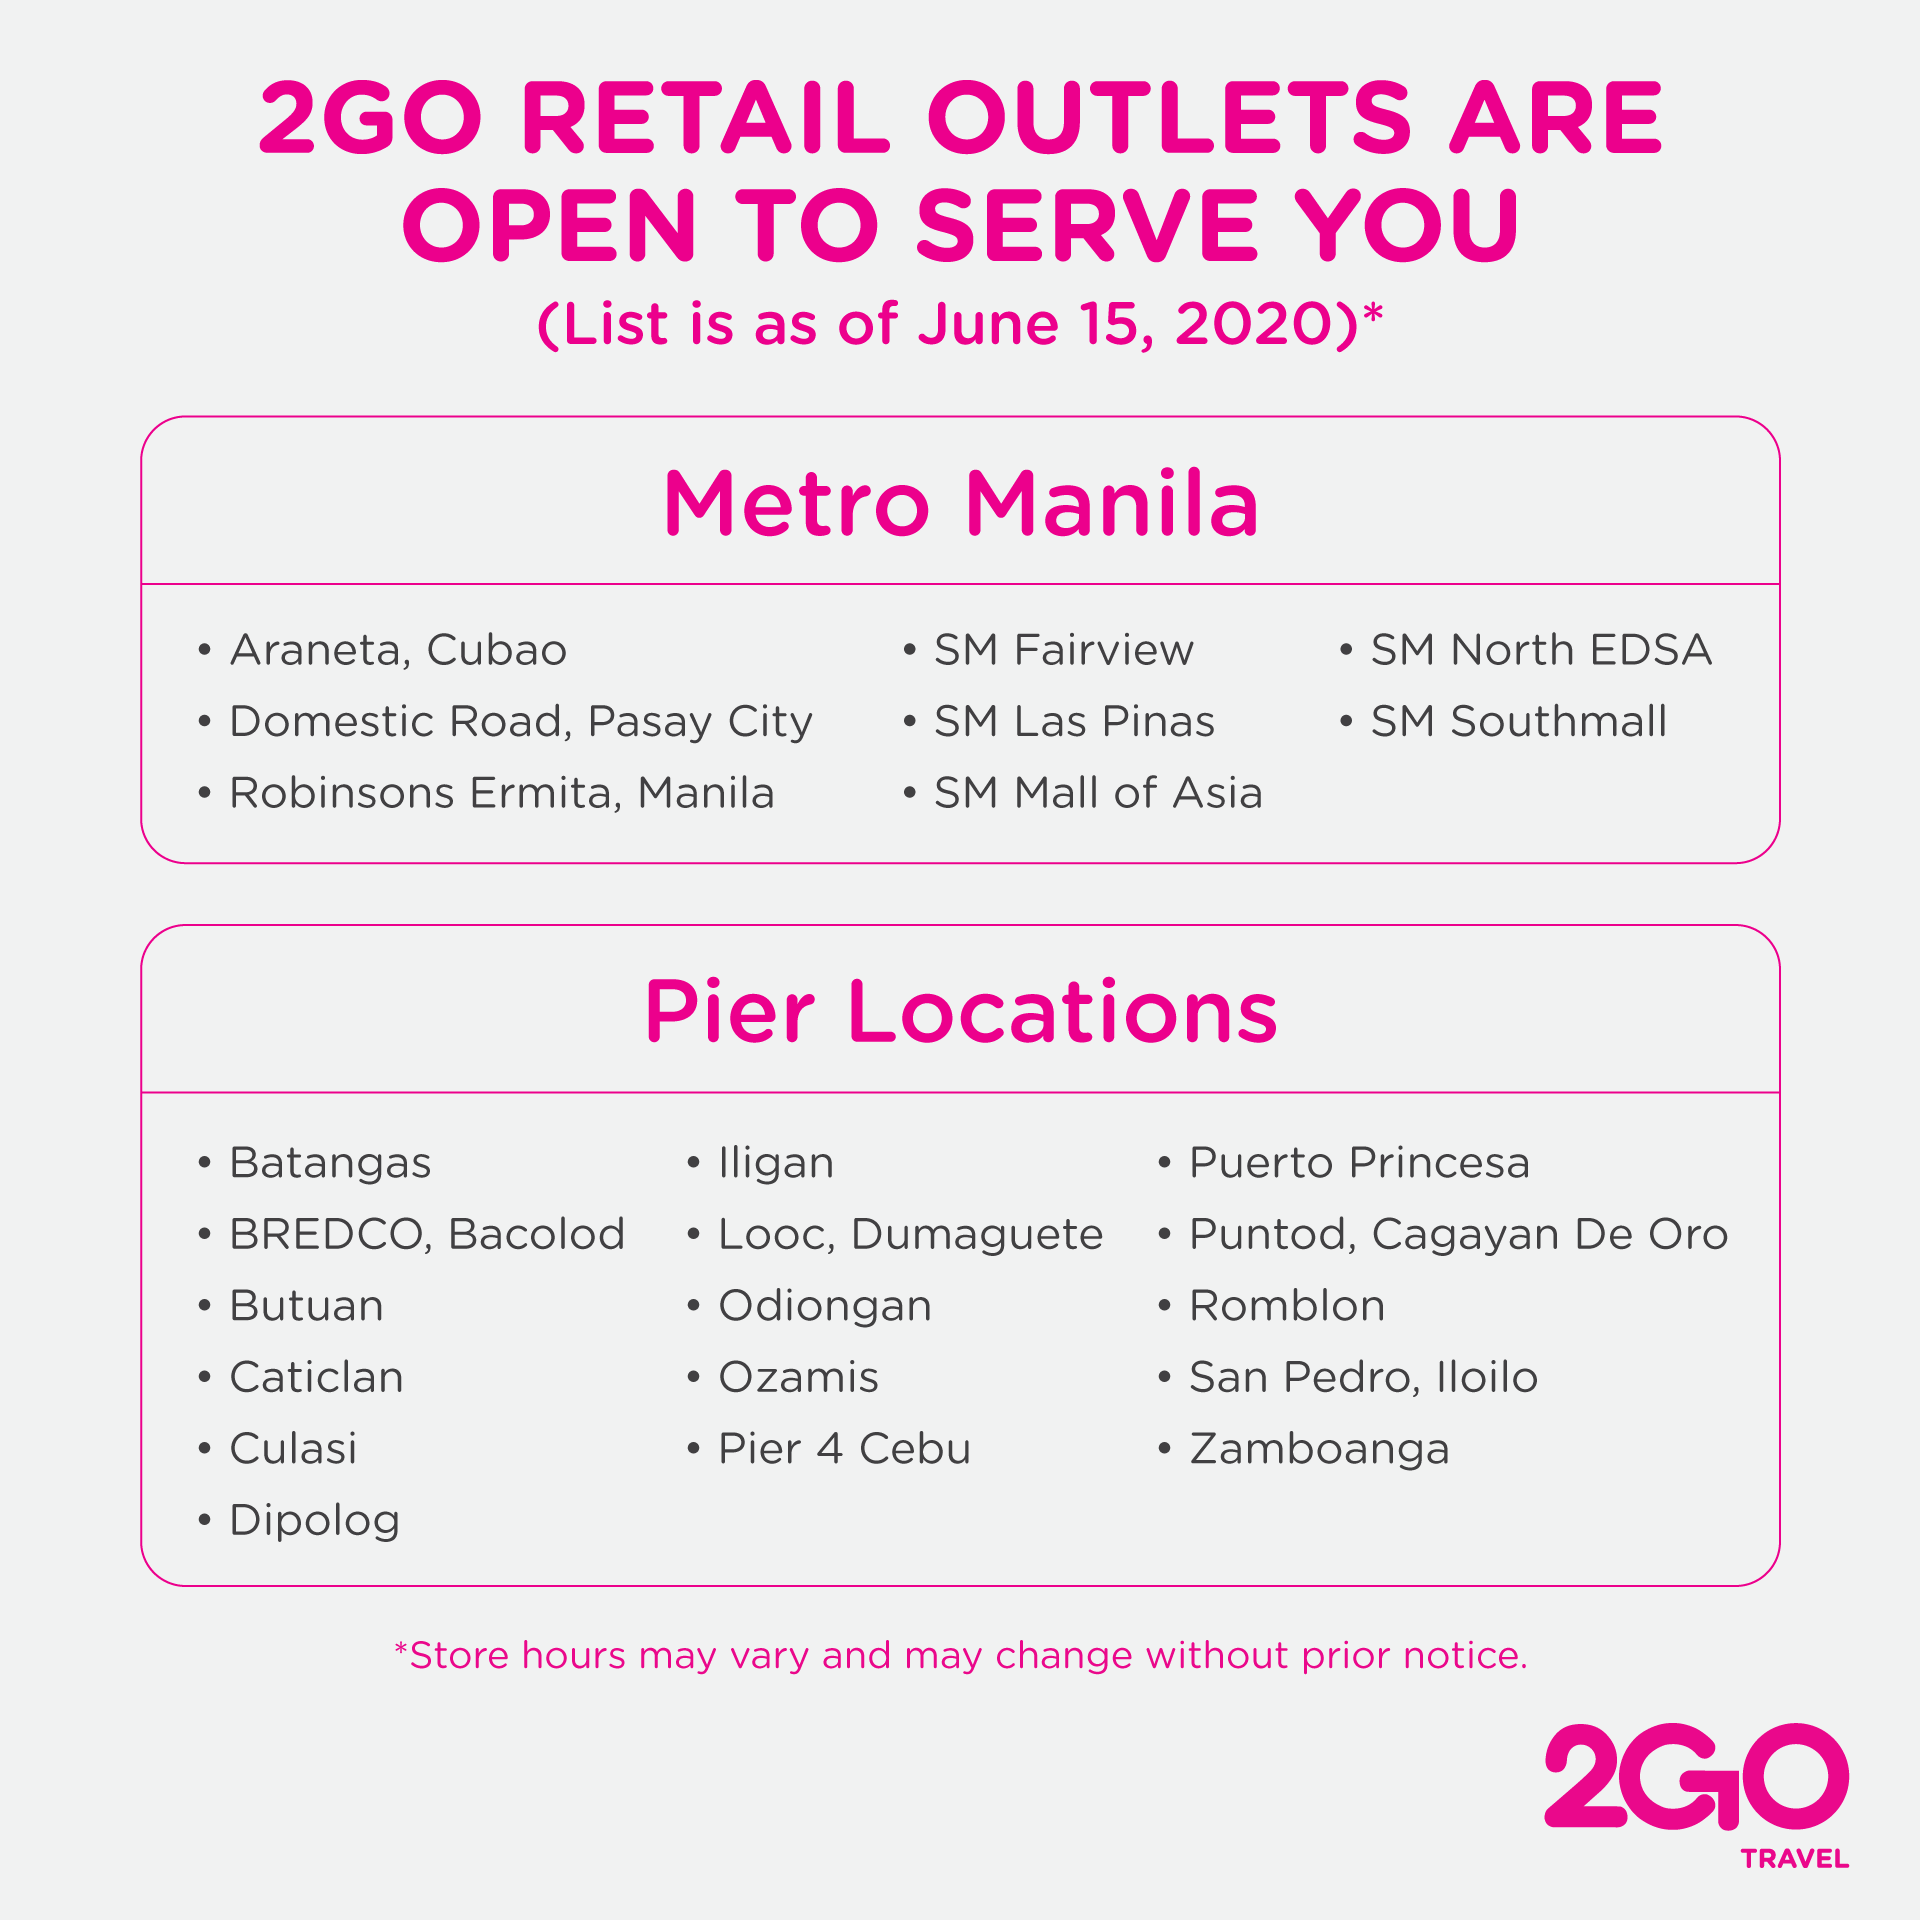 2GO Outlets